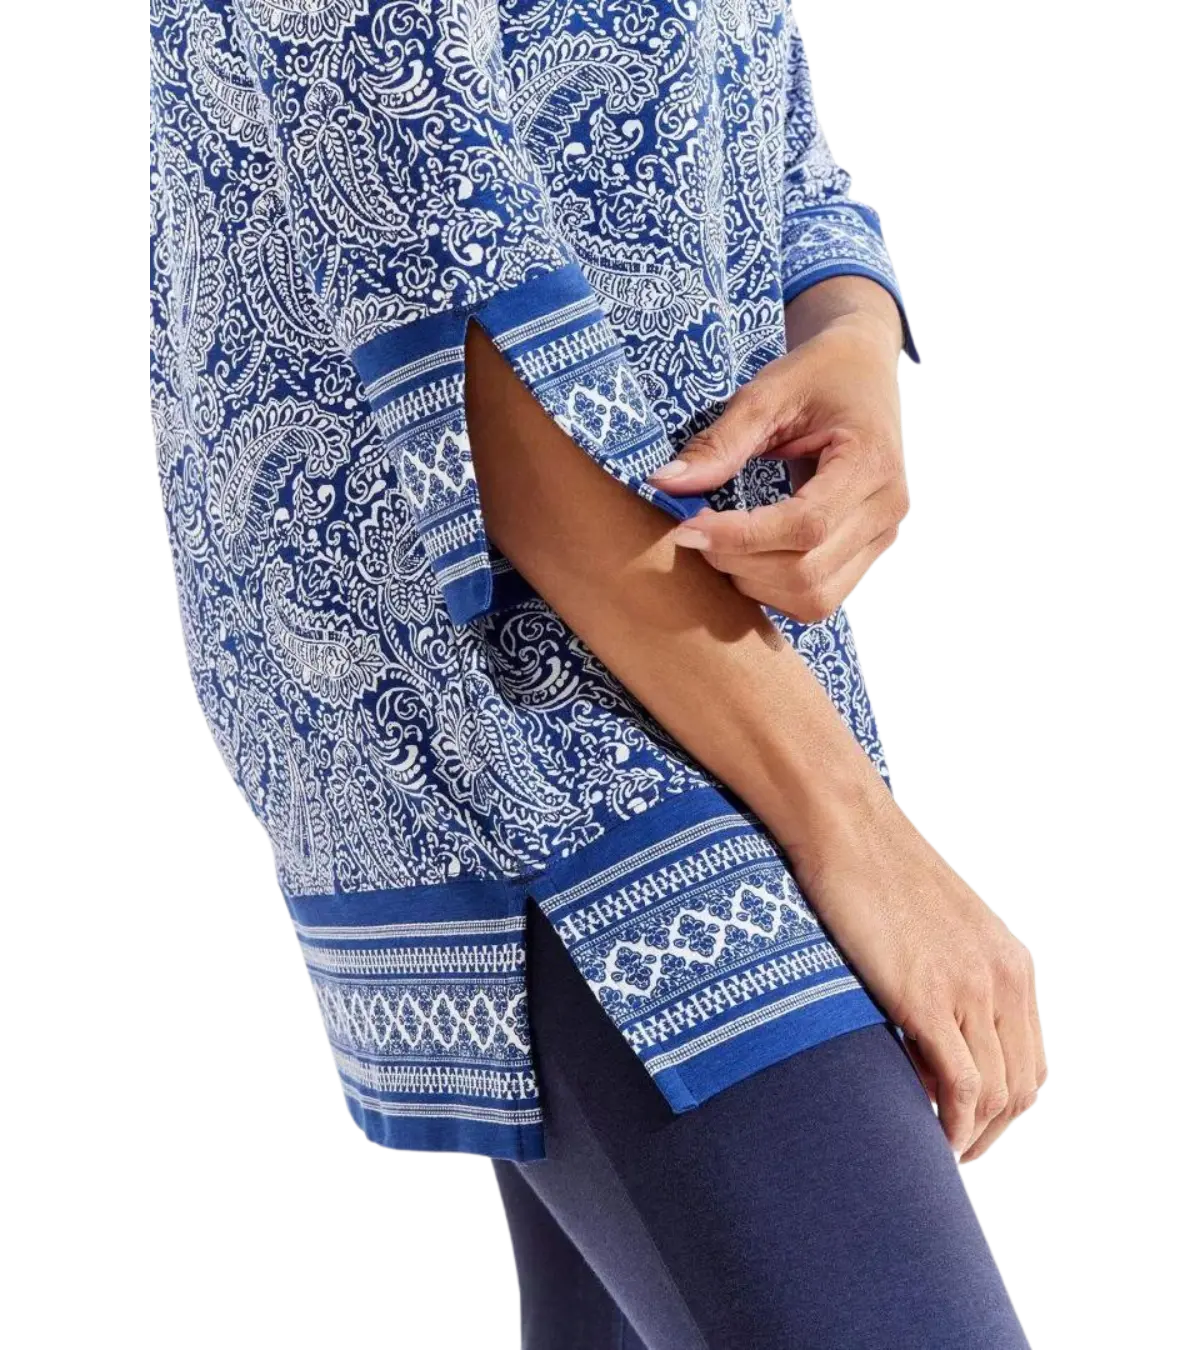 woman wearing a St. Lucia Tunic Top